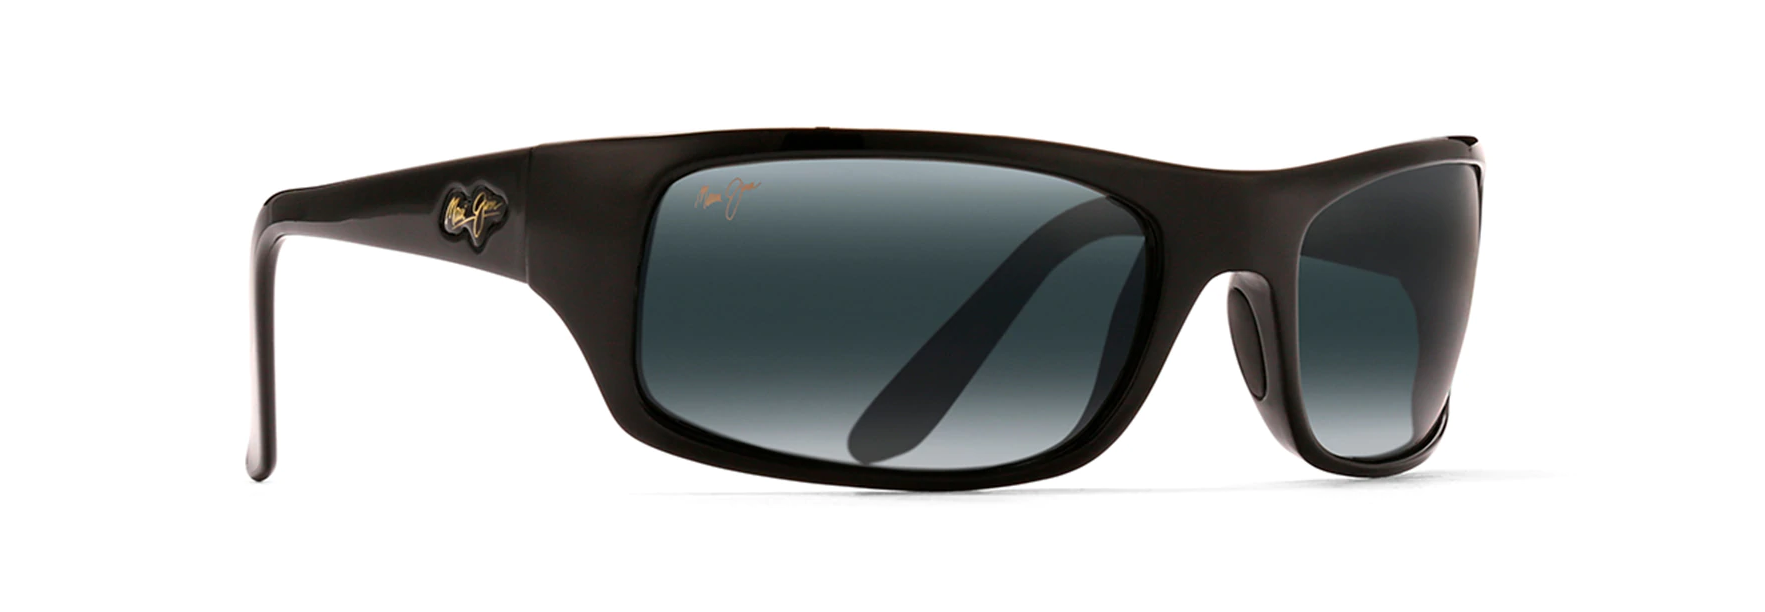 Best Polarized Fishing Sunglasses with Readers of 2021